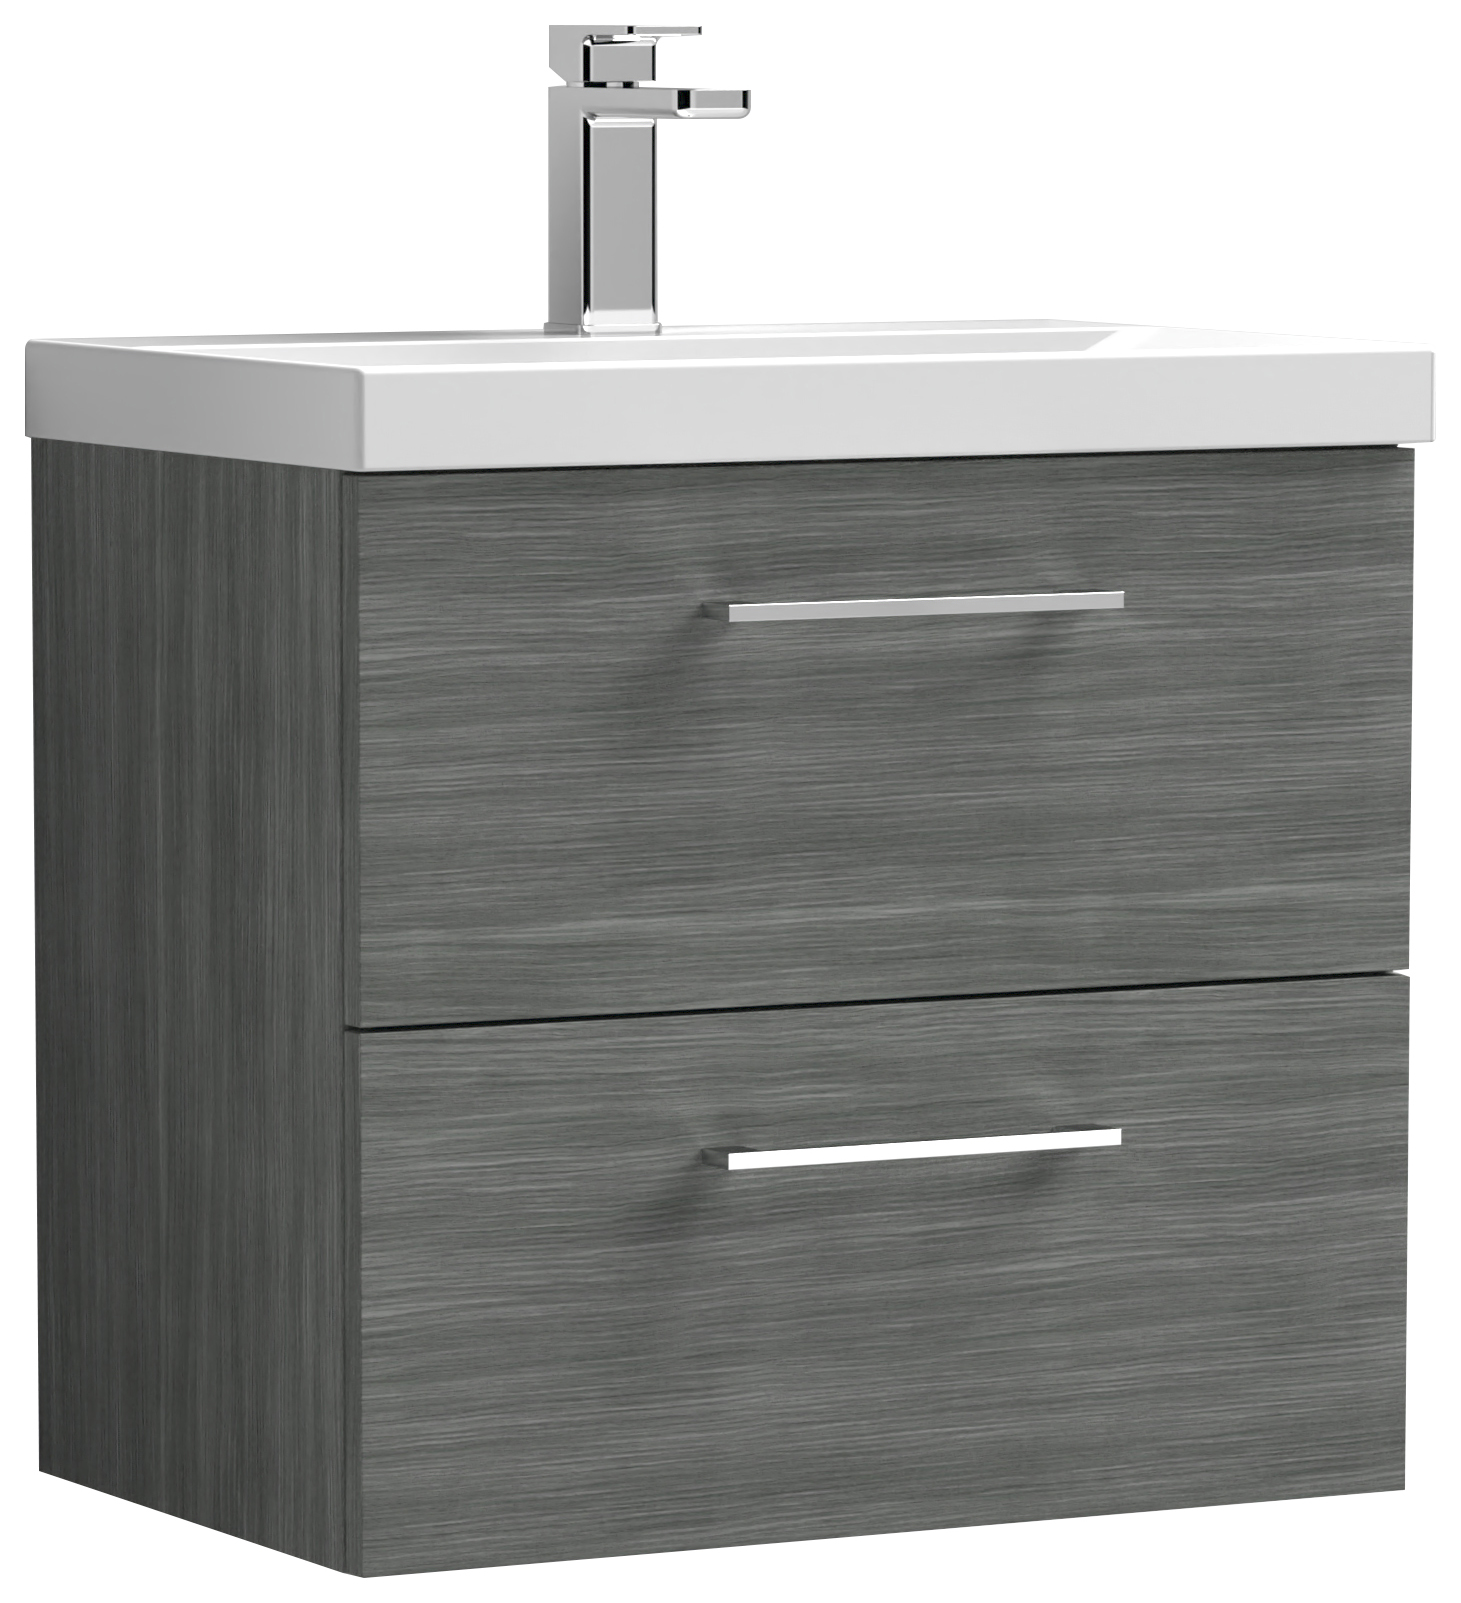 Nuie Arno Anthracite Woodgrain Wall Hung 2 Drawer Vanity Unit & Basin - 579 x 610mm